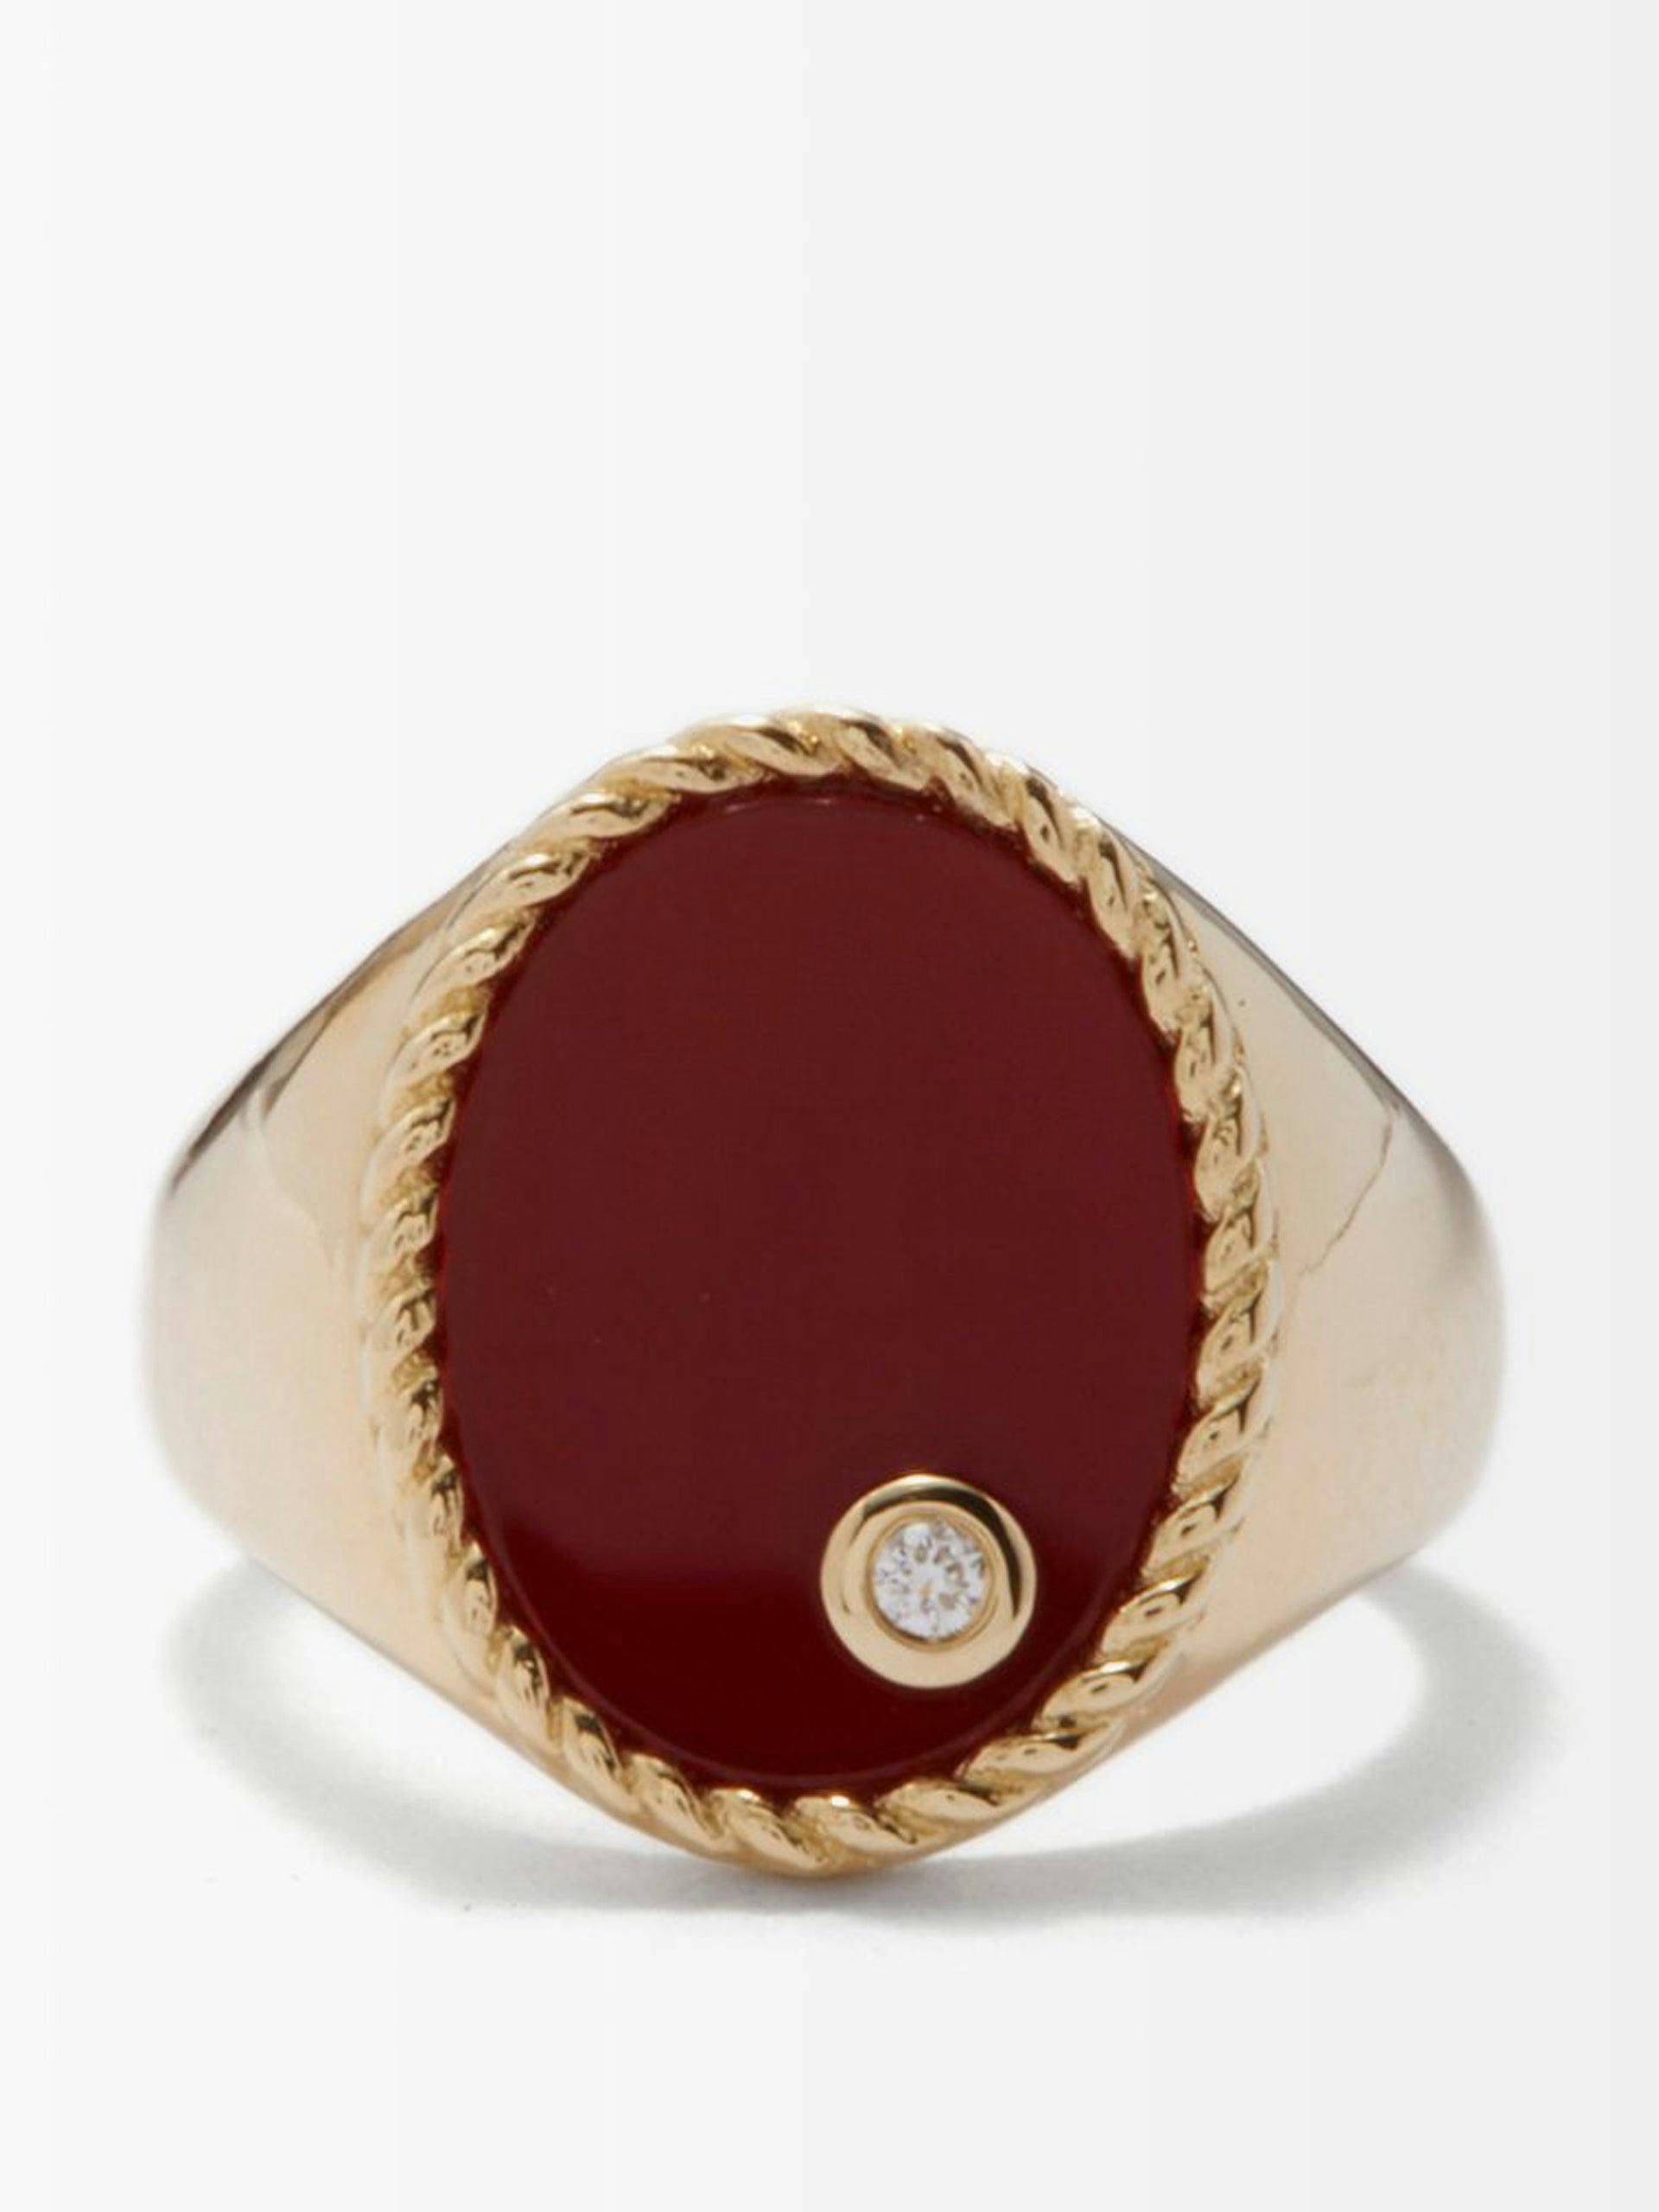 Diamond, agate and 9kt gold ring